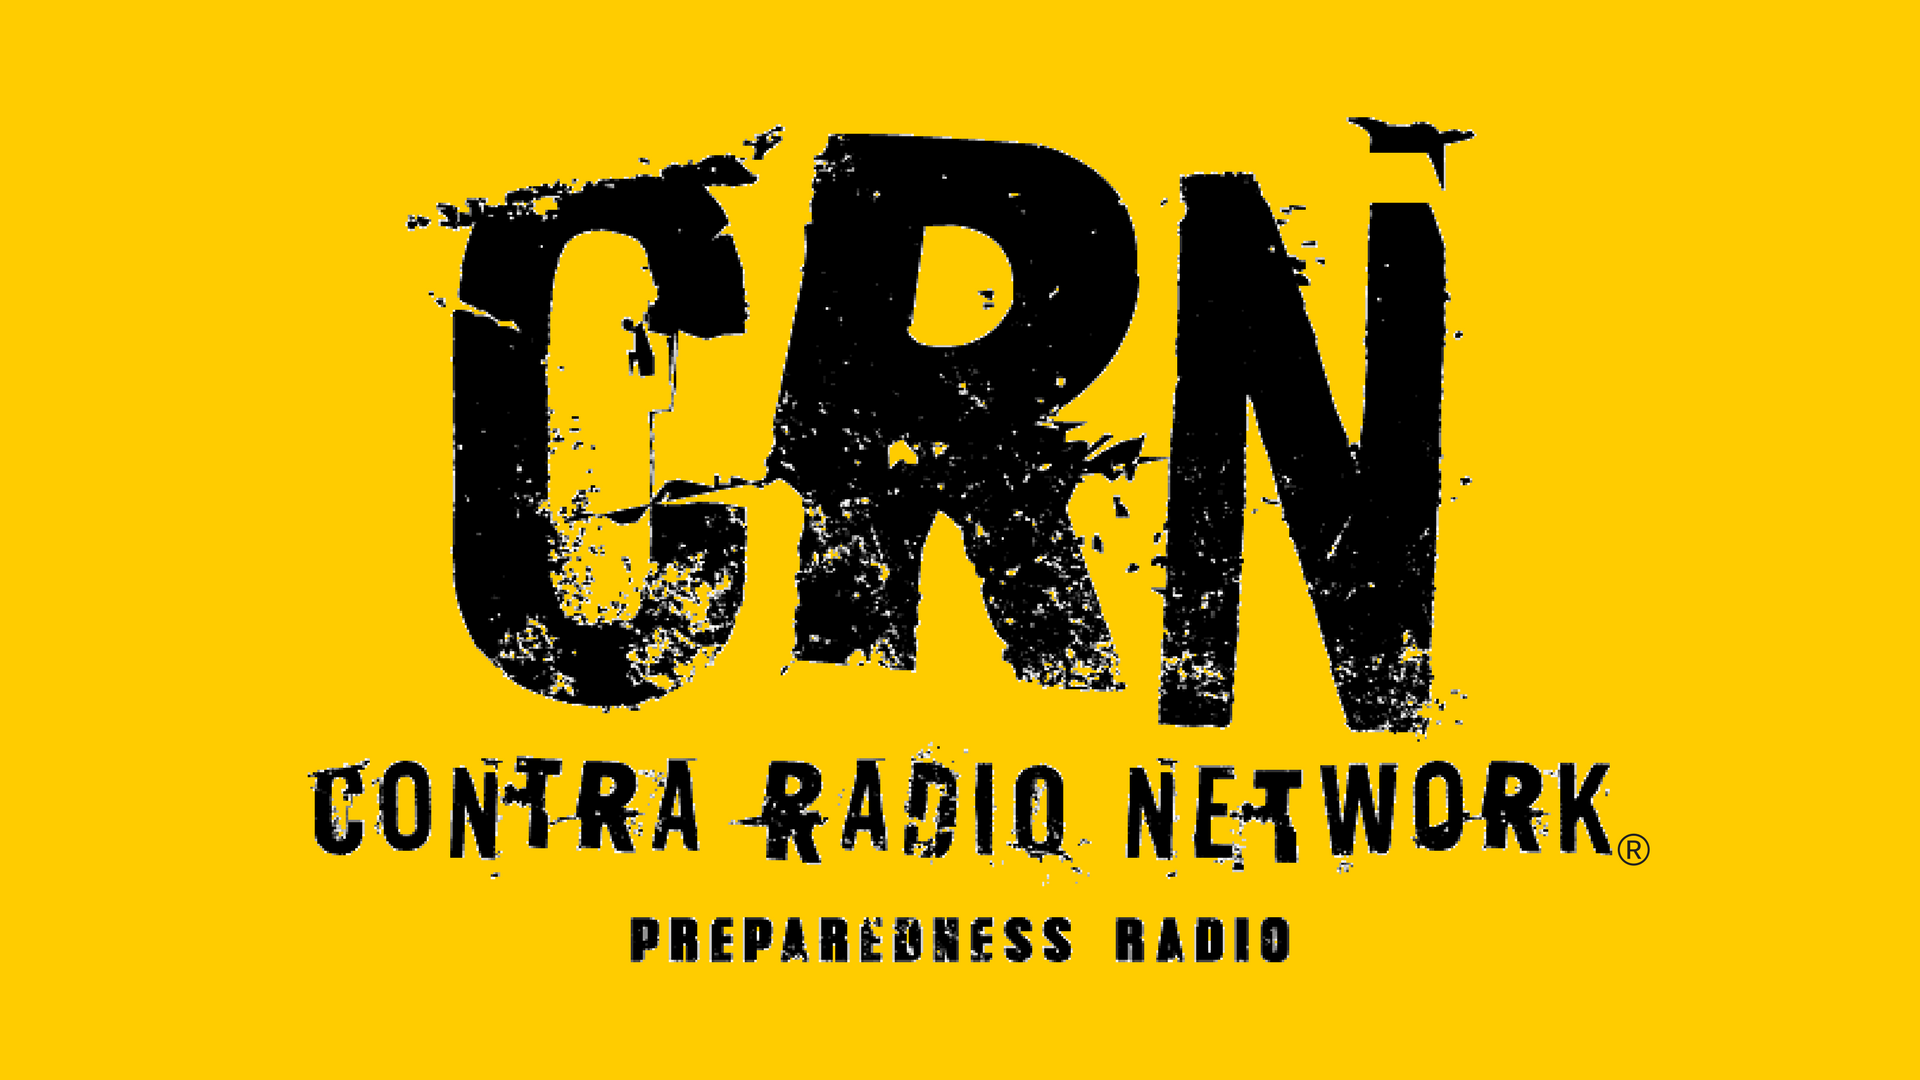 Do You Listen To CRN?